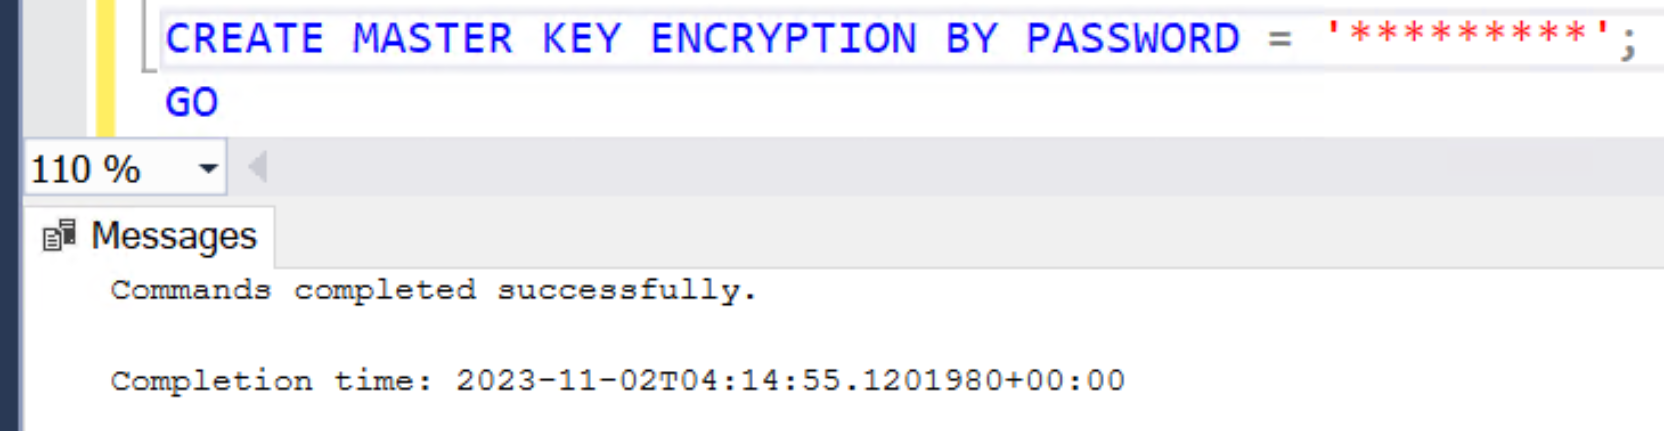 This is an example script and prompt for creating a master key encryption.